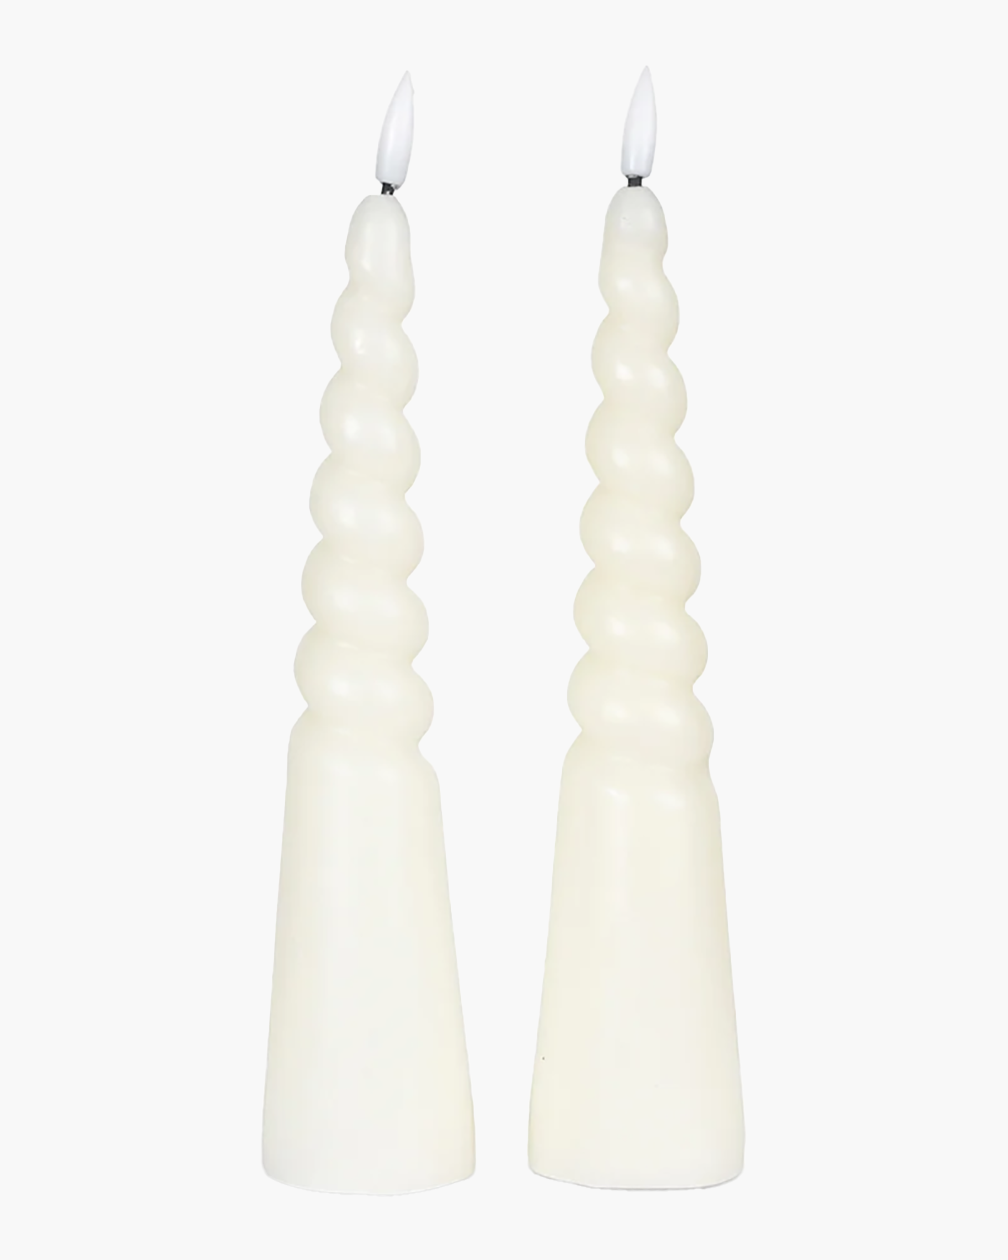 2 TWISTED PILLAR LED CANDLES NATURAL IVORY WAX D5.5 H24.5 CM